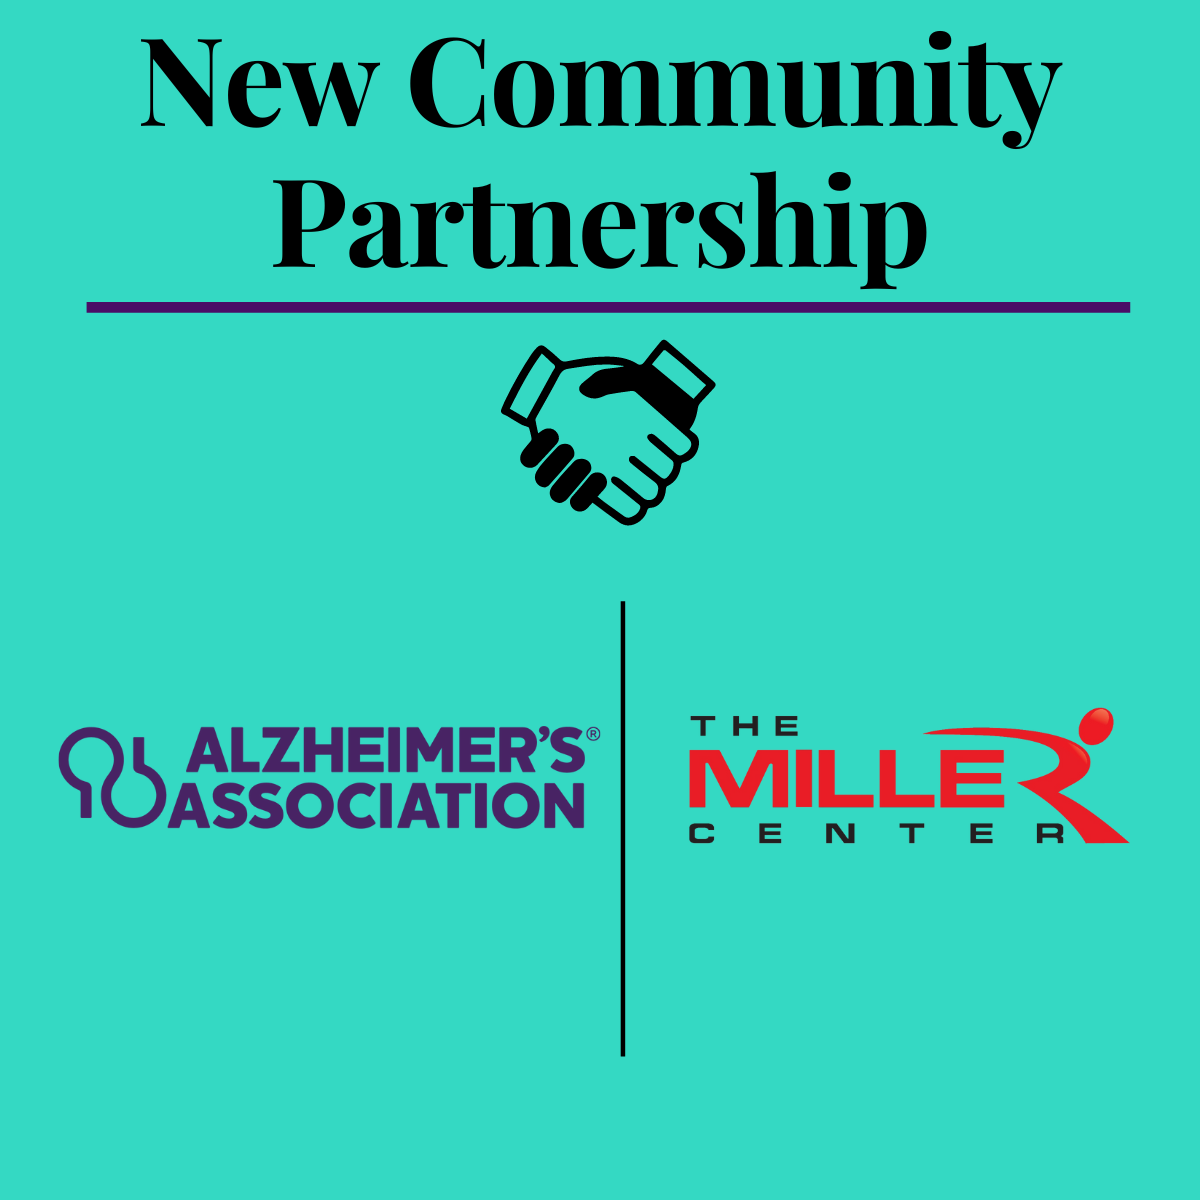 New community partnership graphic with The Miller Center and Alzheimer's Association logos